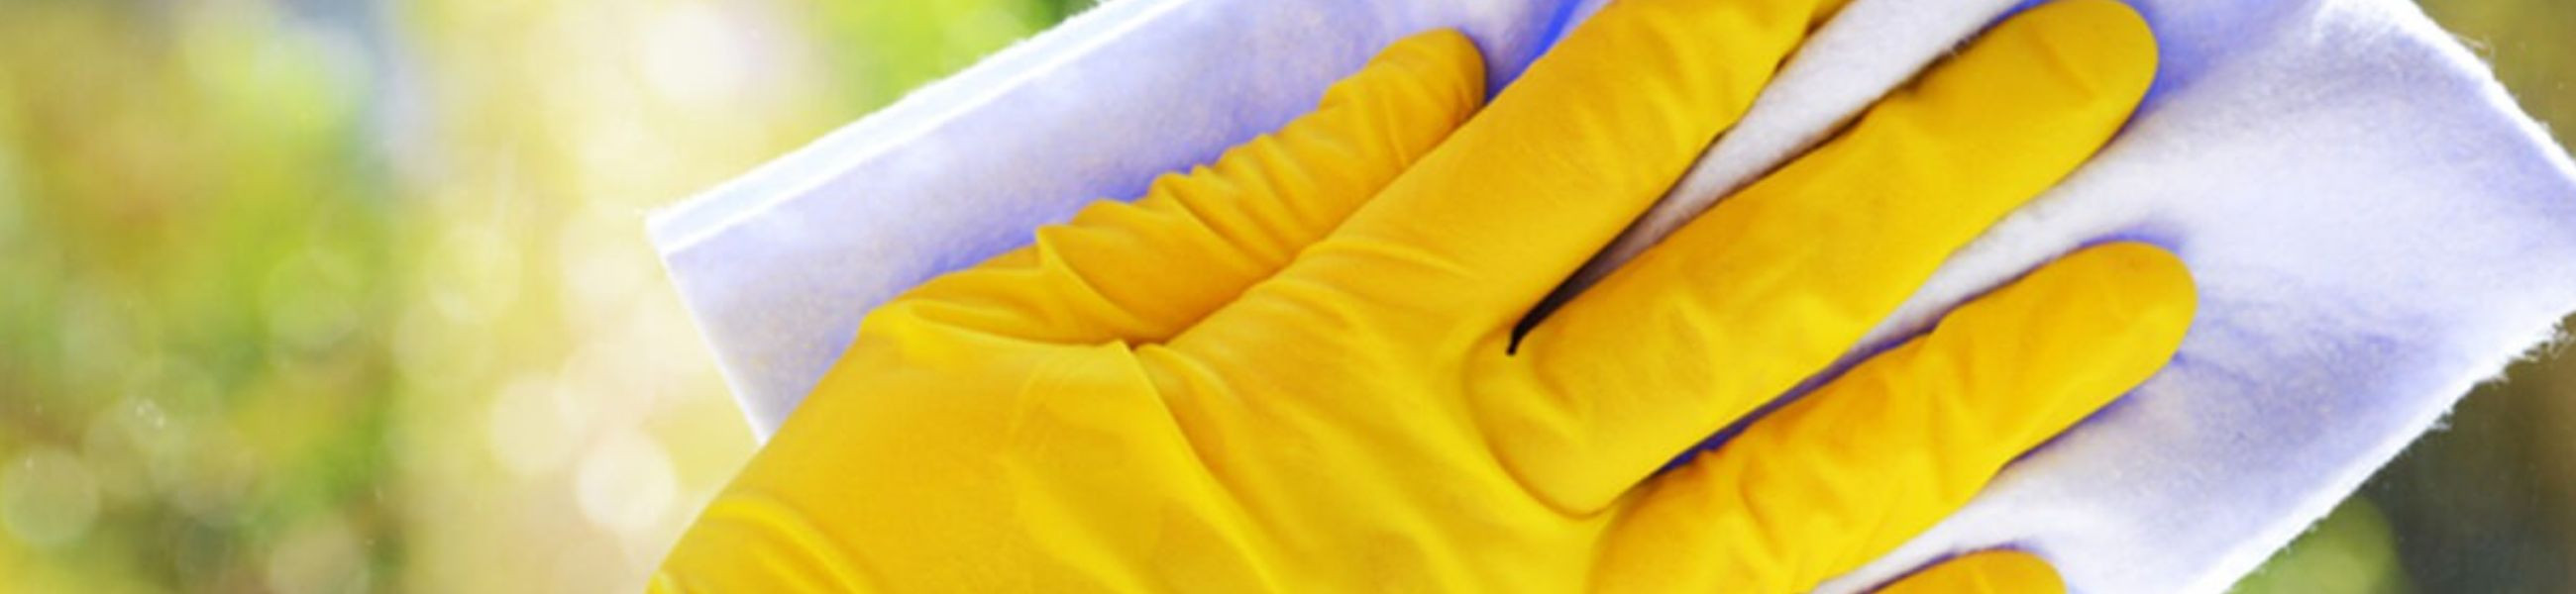 We specialize in the development, production, and sales of eco-friendly cleaning and disinfectant products.